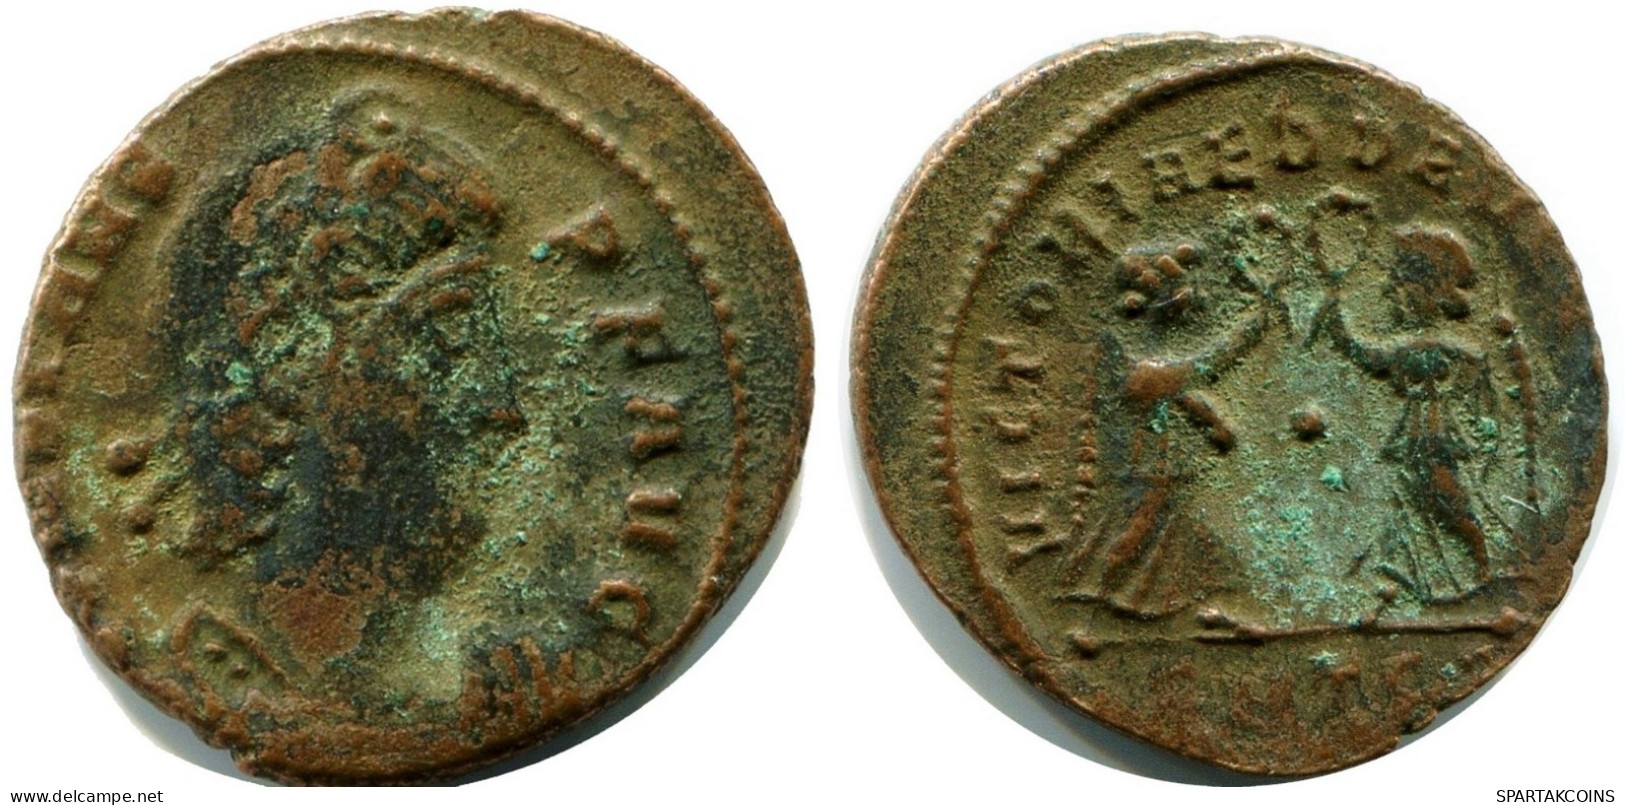 CONSTANS MINTED IN THESSALONICA FROM THE ROYAL ONTARIO MUSEUM #ANC11907.14.U.A - Der Christlischen Kaiser (307 / 363)